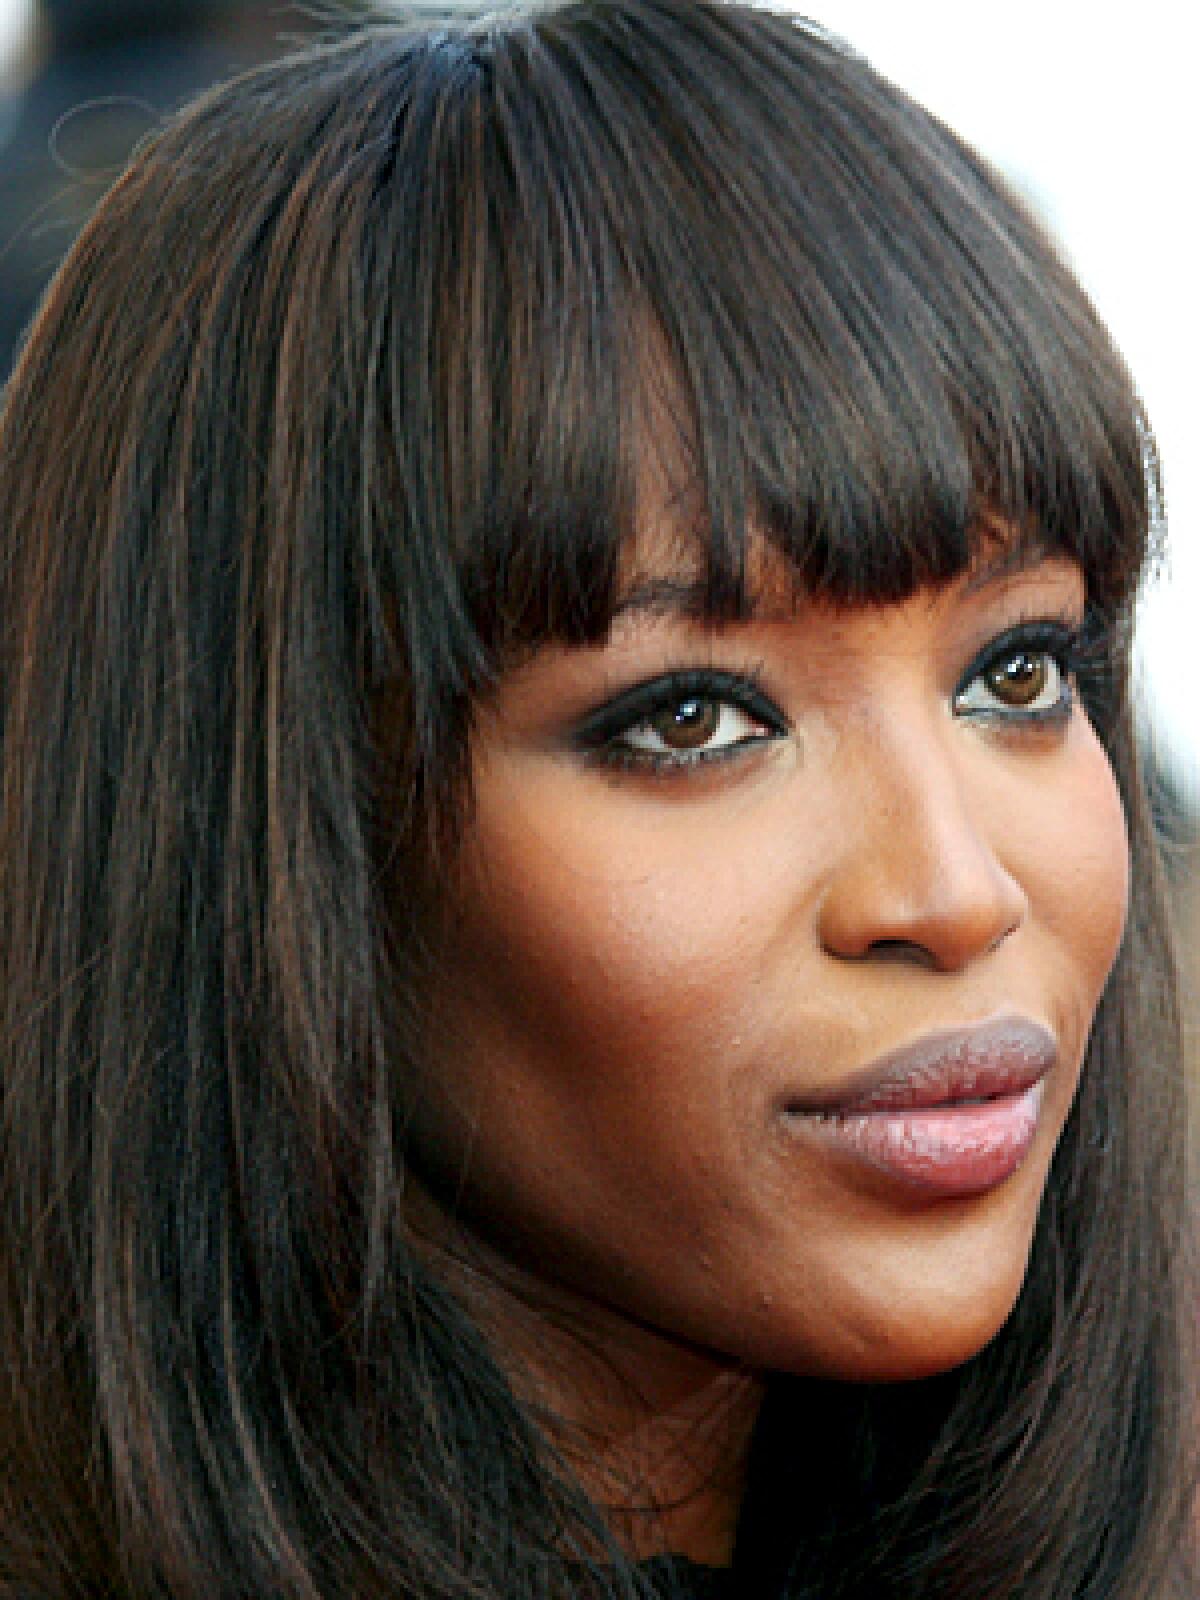 NO MORE NAOMI: British supermodel Naomi Campbell was released on bail early after having been removed from a British Airways flight at London's Heathrow airport. She's been banned fromt the airline.